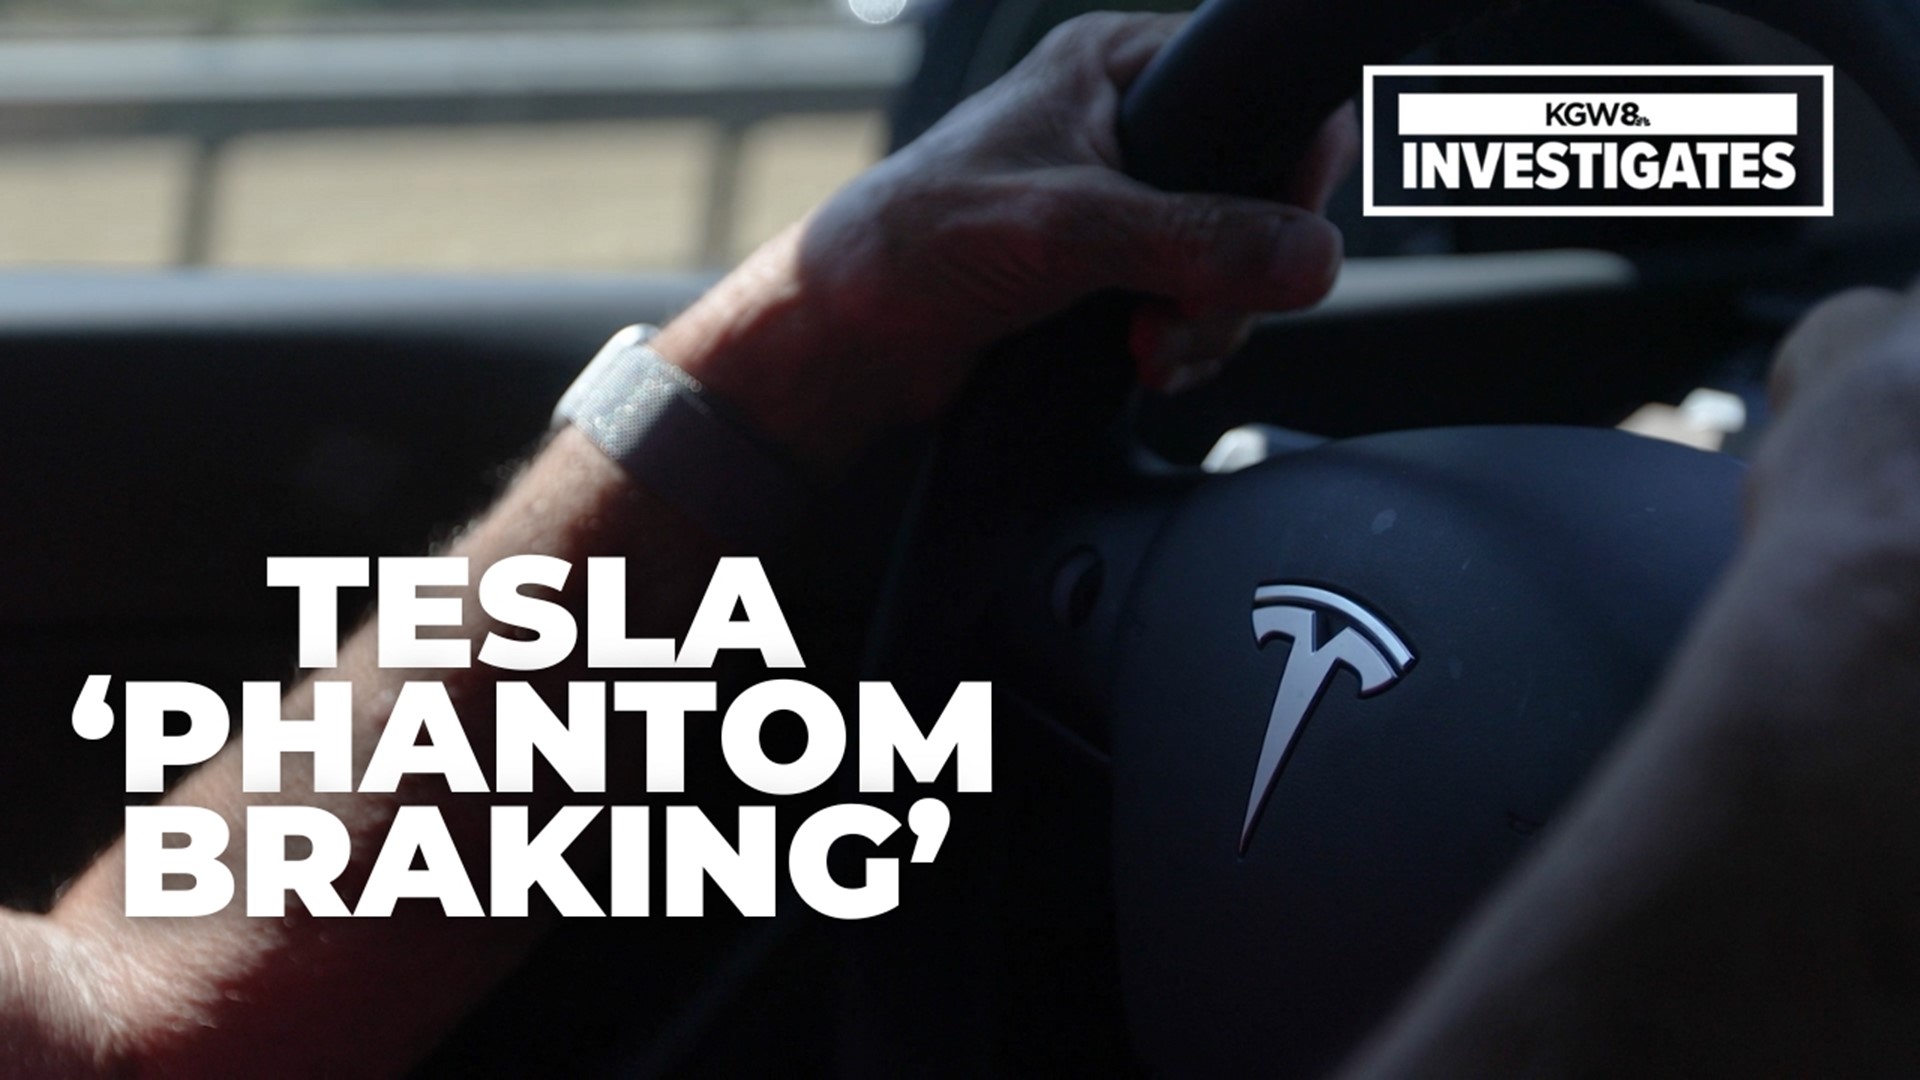 A KGW investigation documented hundreds of complaints about Tesla cars slamming the brakes for imagined hazards. It even happened during the reporting of this story.